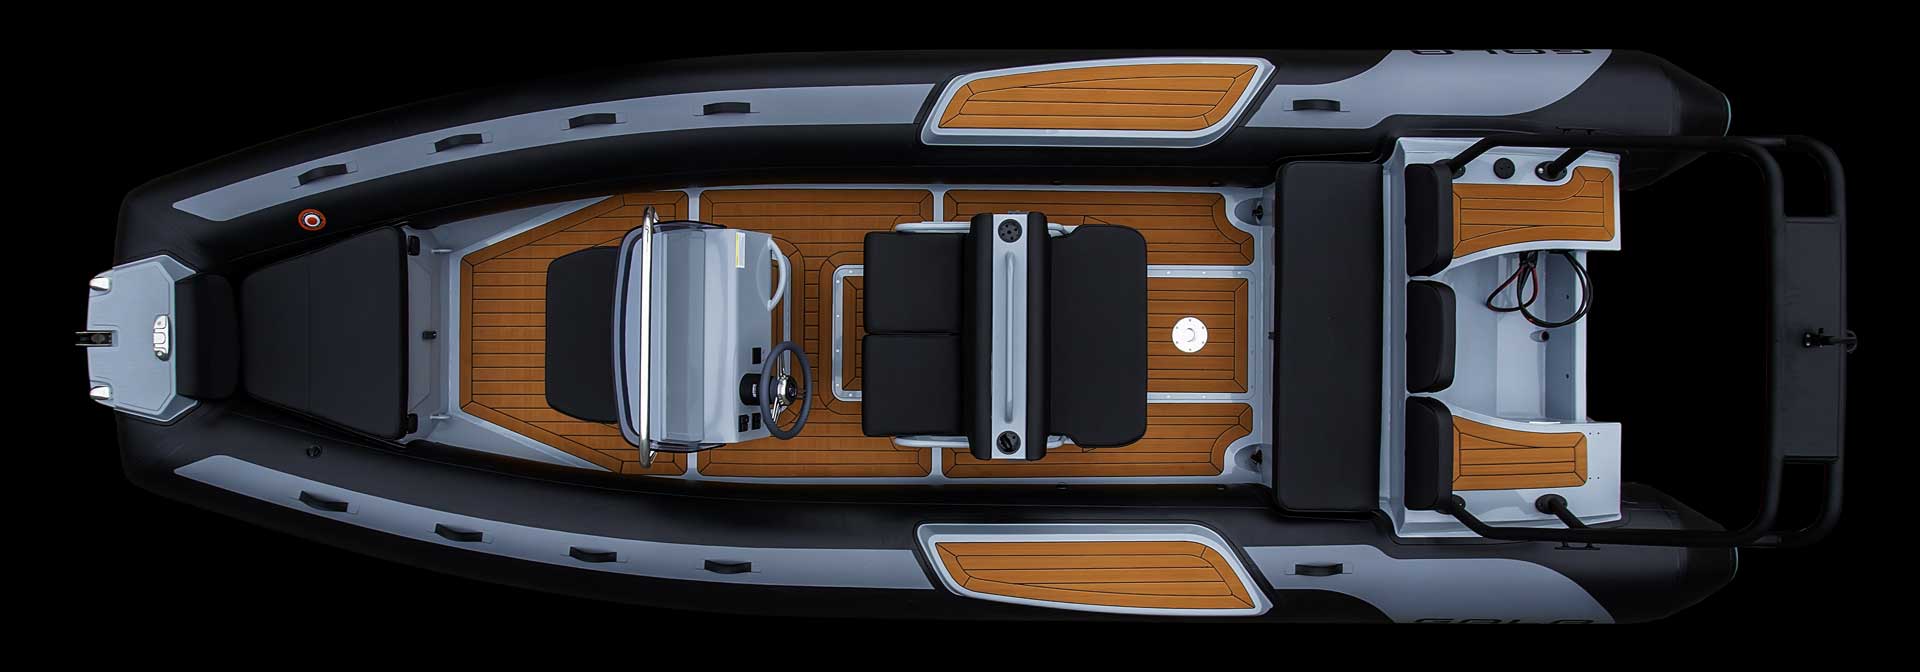 Top view of a Gala Viking aluminum rigid inflatable boat RIB, black tube option with seadeck.